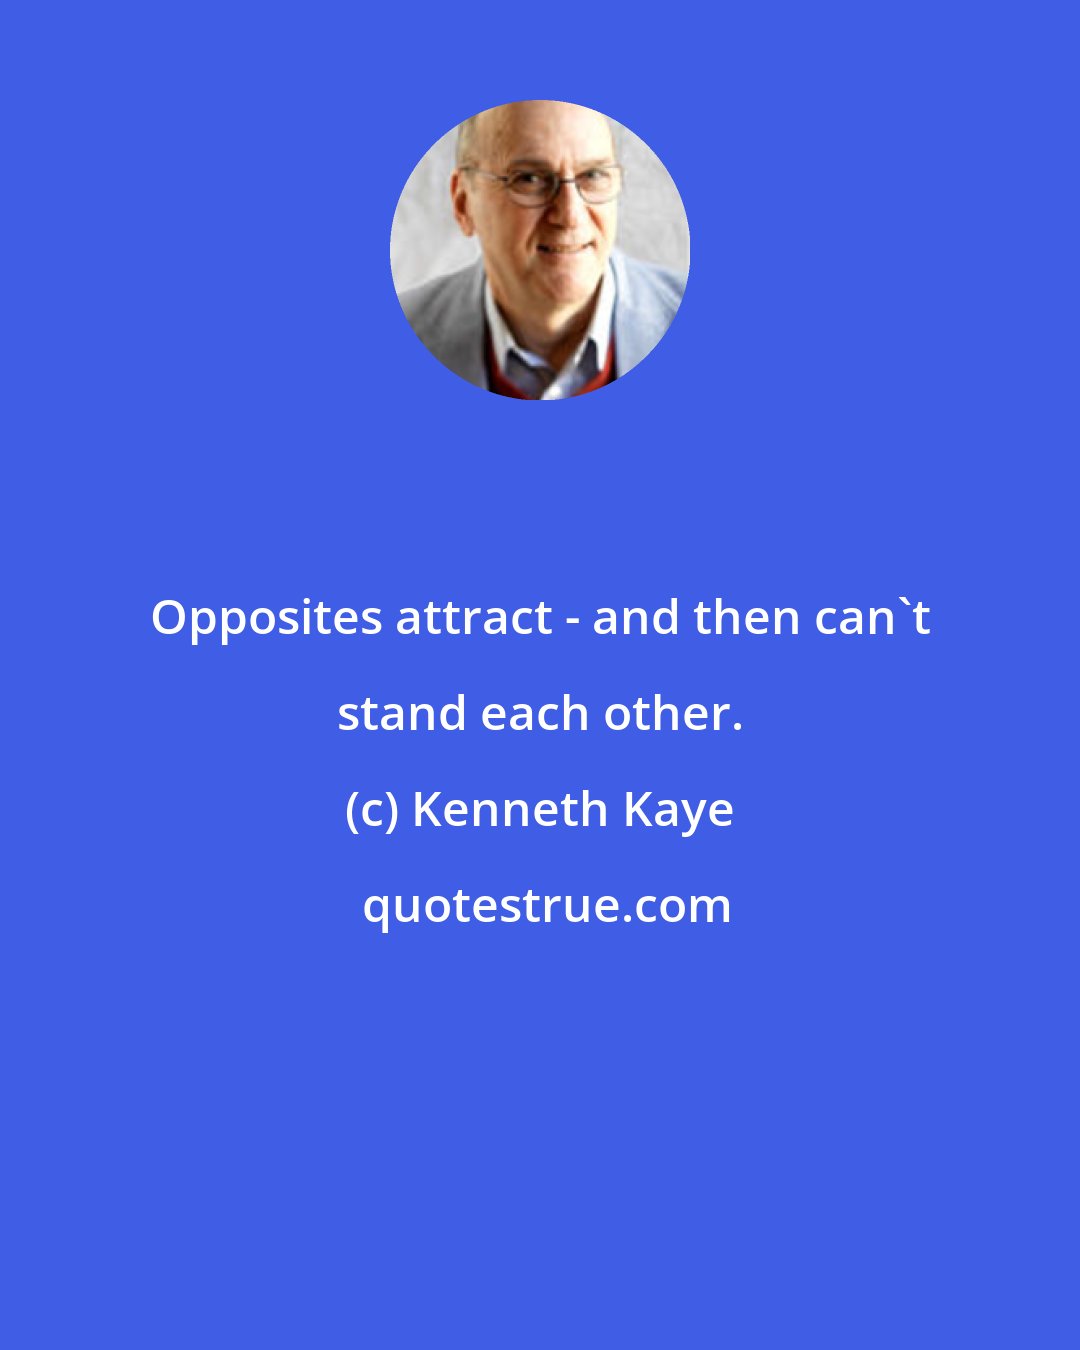 Kenneth Kaye: Opposites attract - and then can't stand each other.